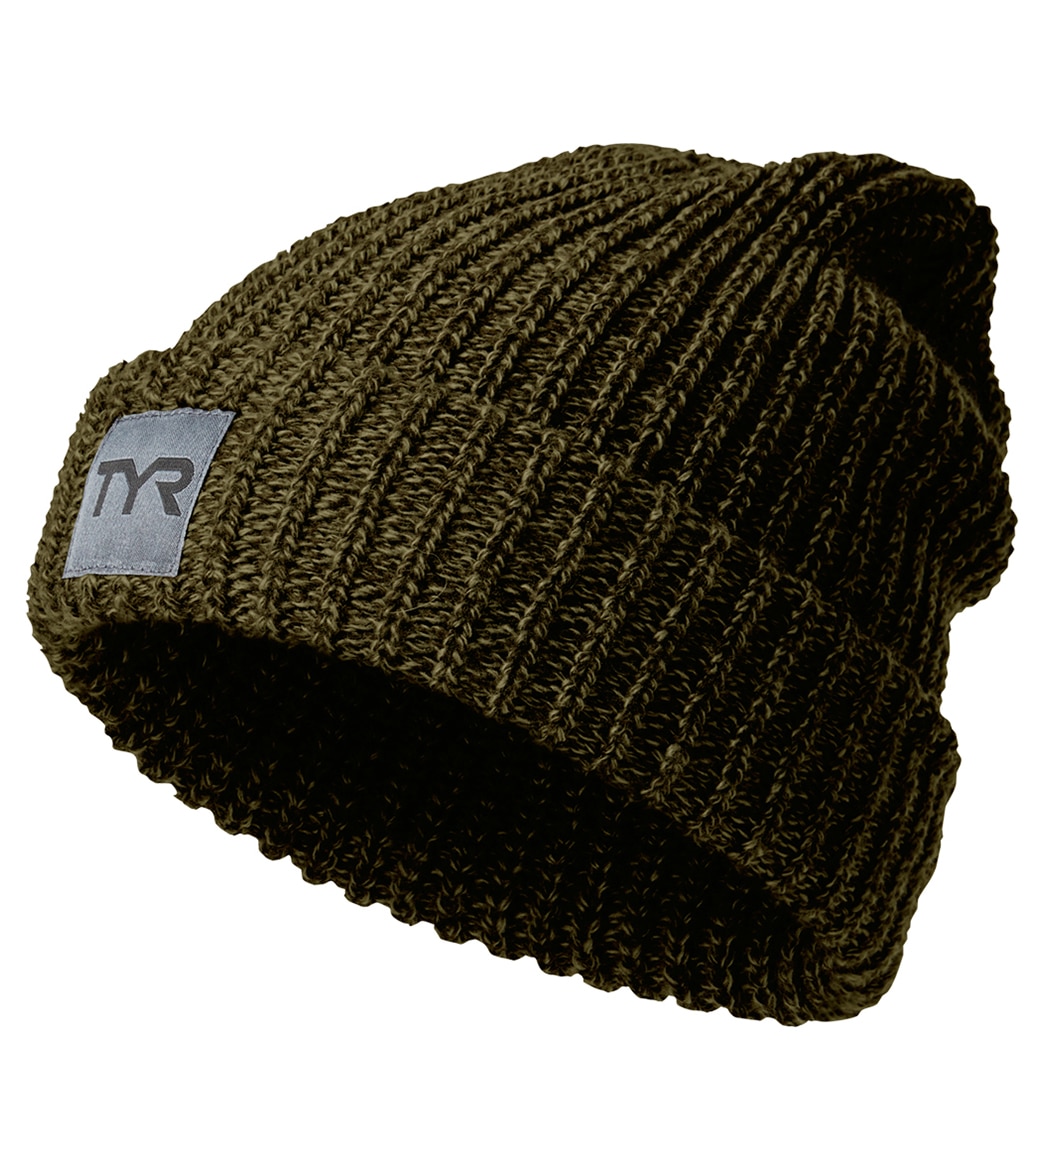 TYR Cuffed Ribbed Beanie - Olive One Size - Swimoutlet.com